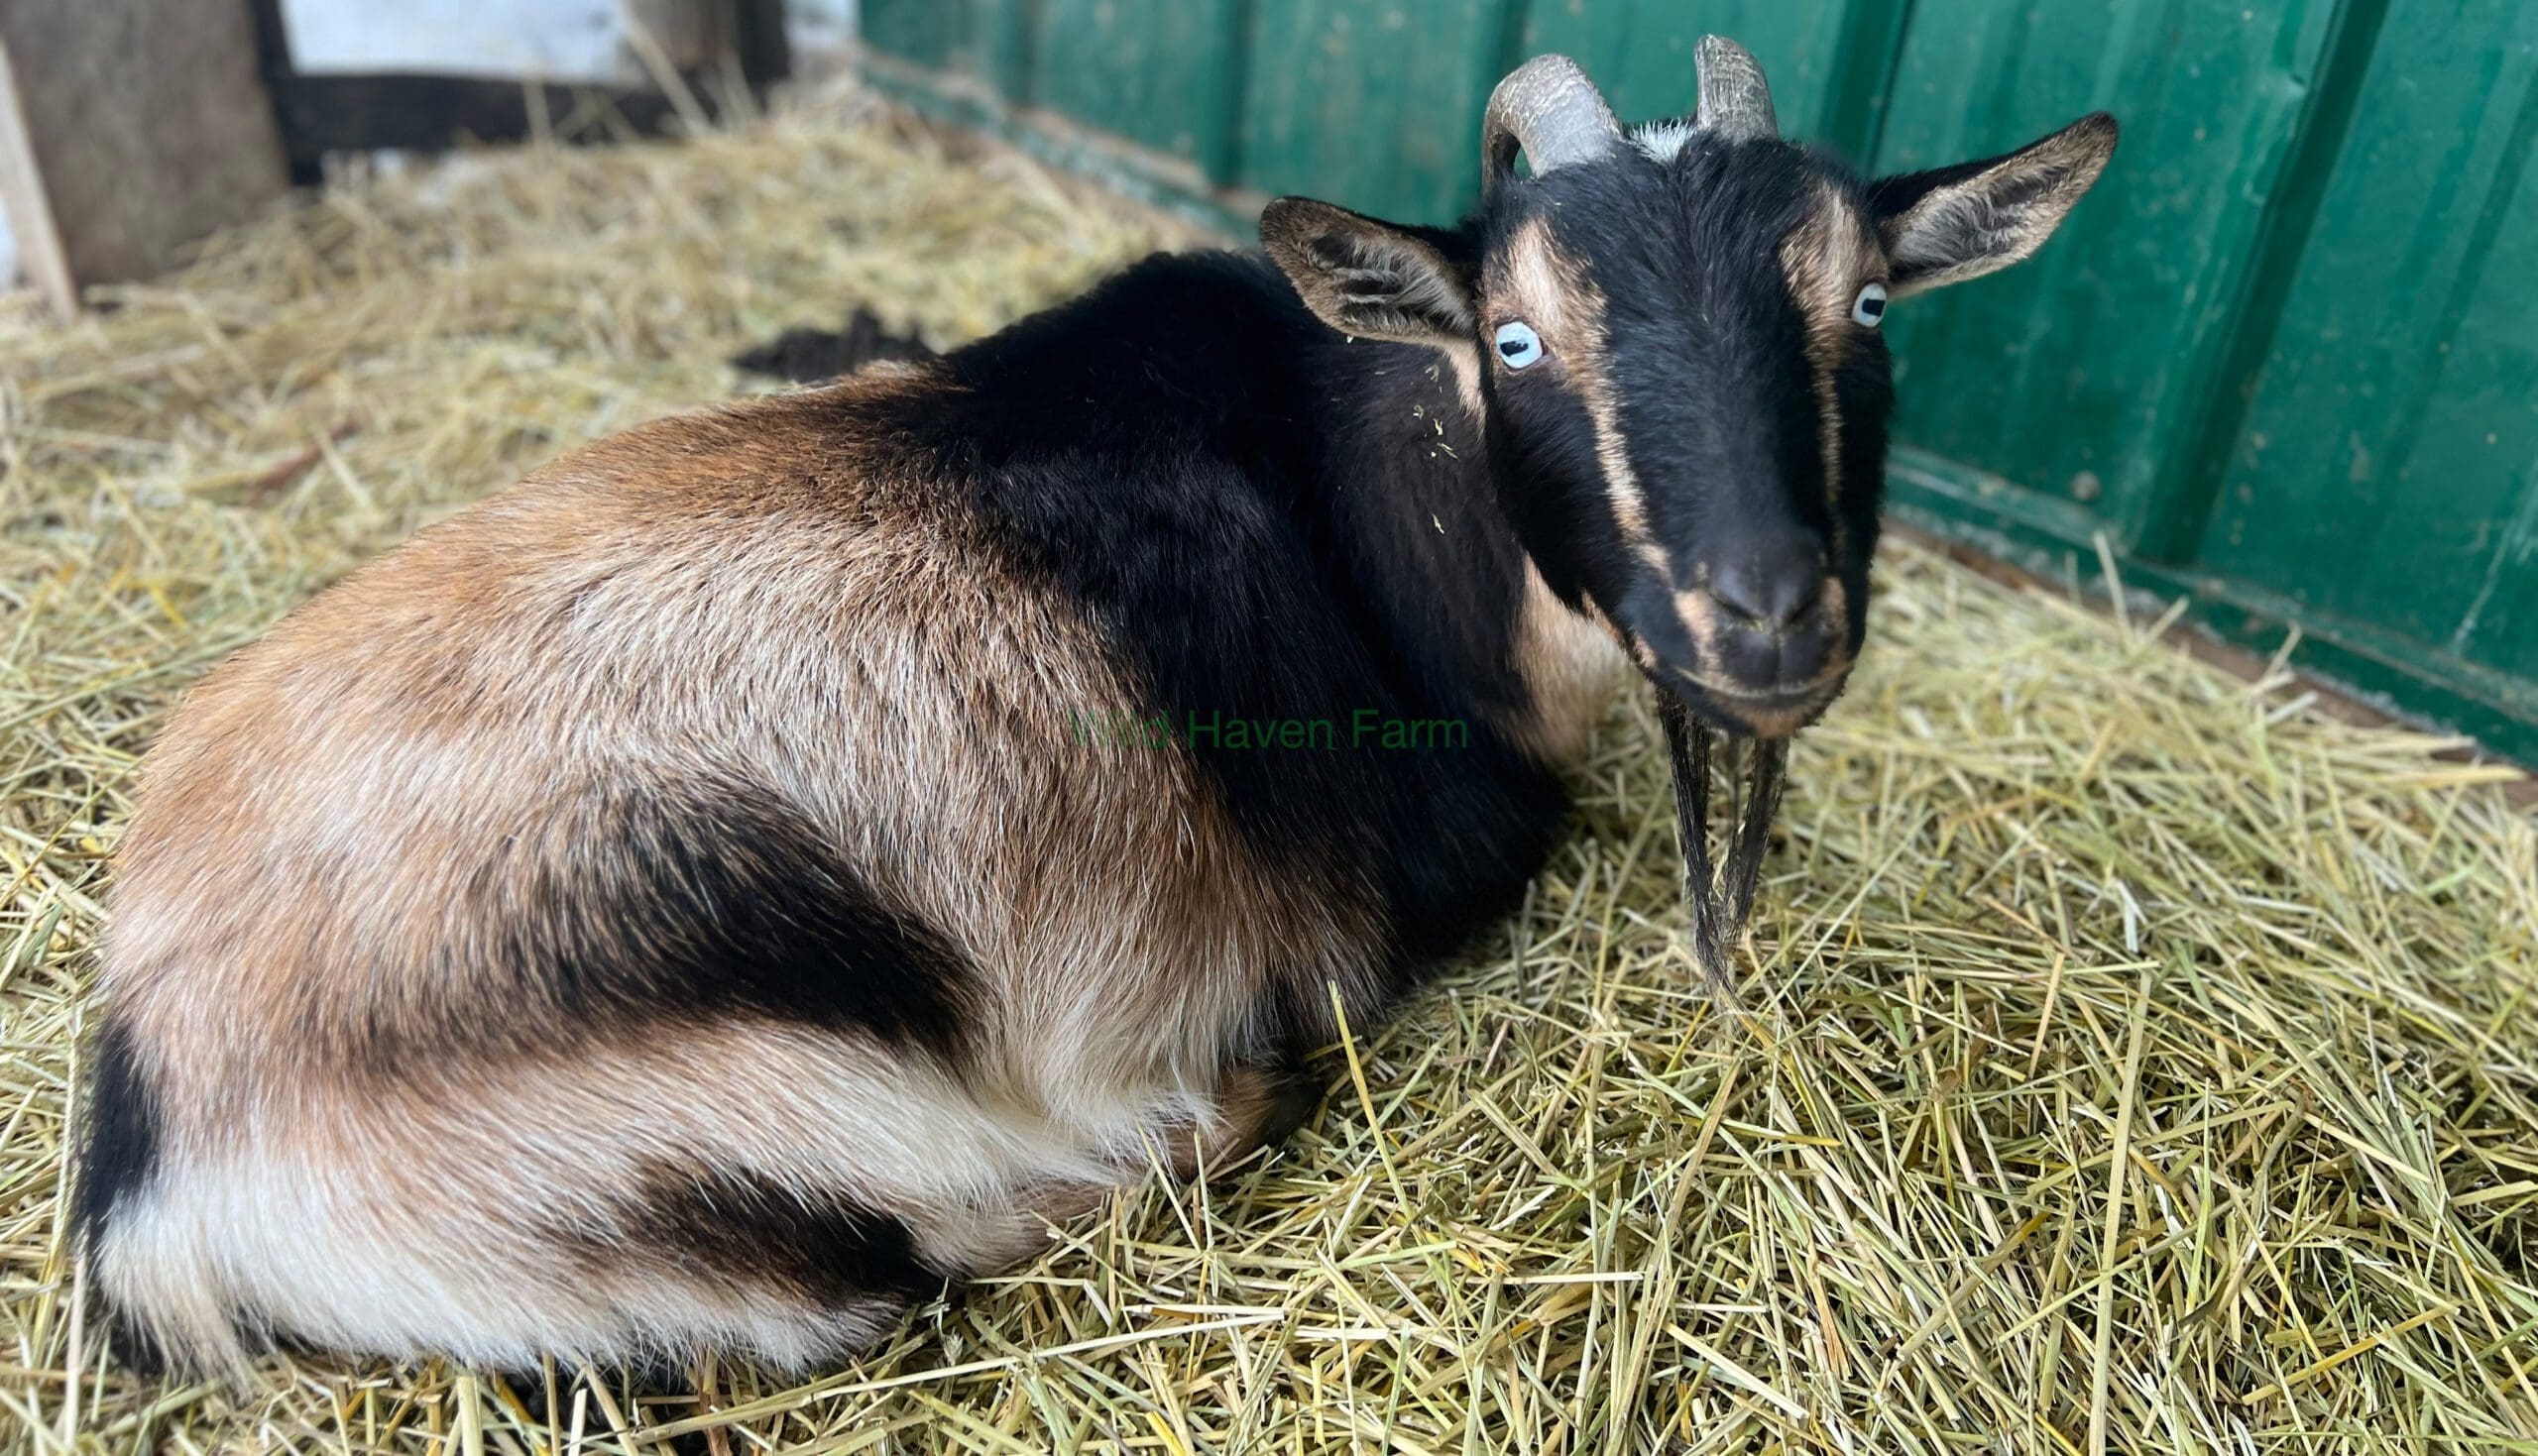 Goat named Skye laying on hay looking at the camera